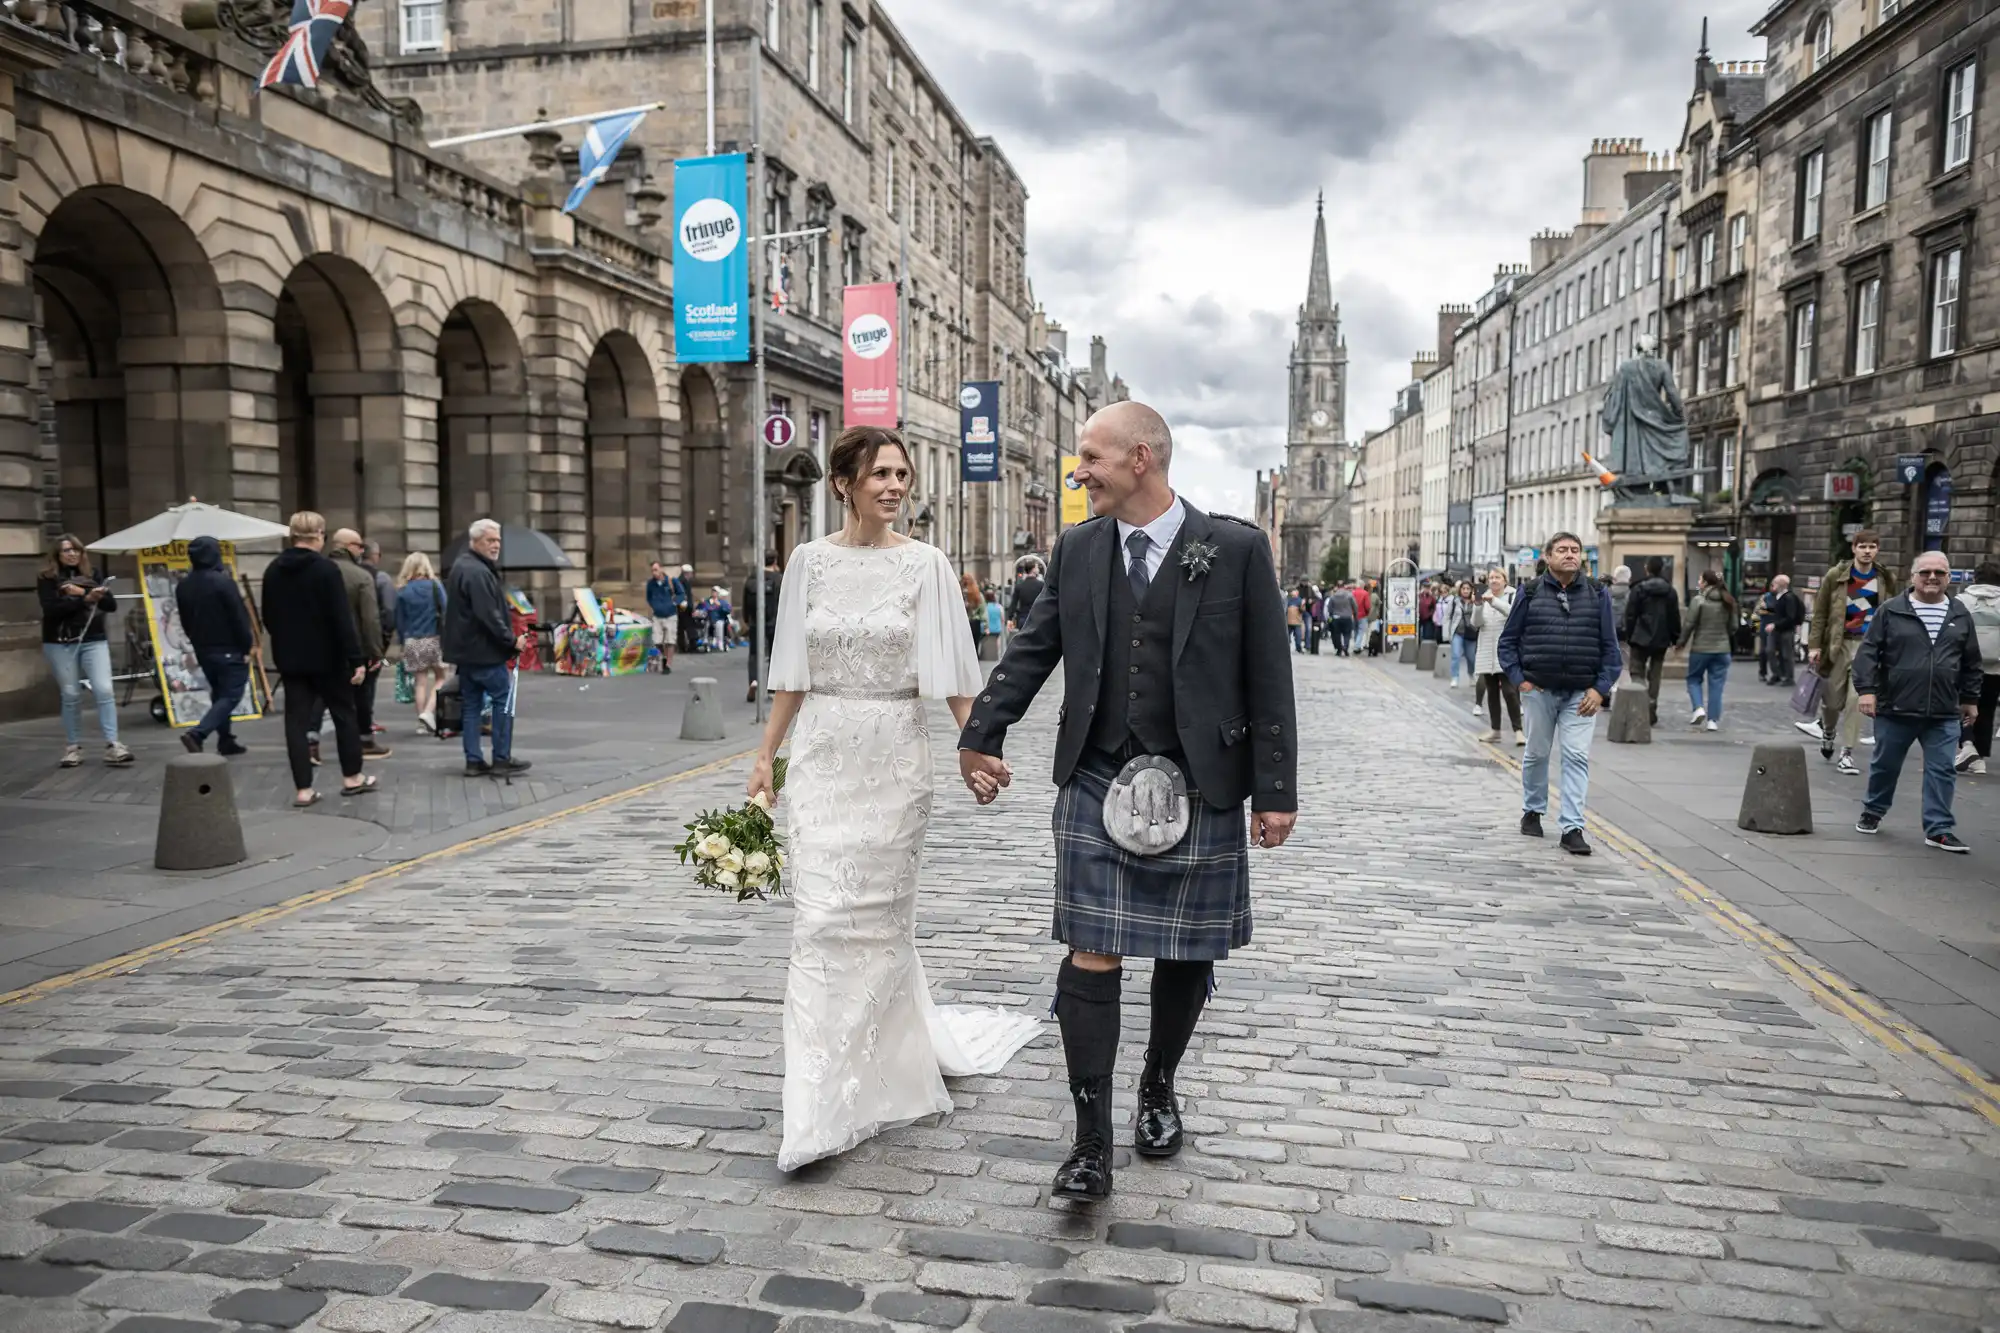 A bride and groom walk hand-in-hand along a cobbled street in a historic European city, surrounded by pedestrians and buildings under a cloudy sky.